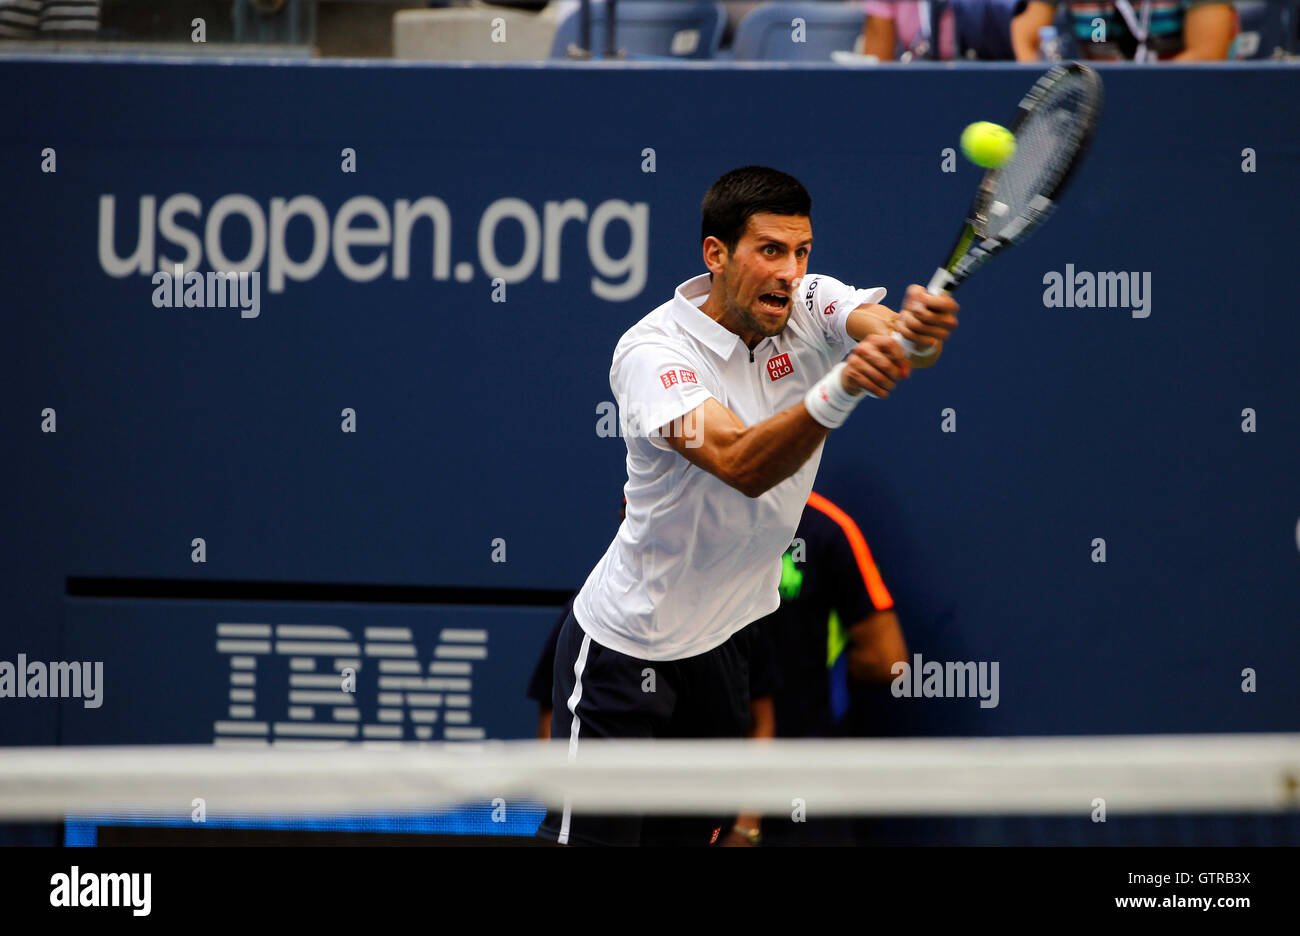 New York, United States. 09th Sep, 2016. Novak Djokovic during his semi final match against Gael Monfils of France at the United States Open Tennis Championships at Flushing Meadows, New York on Friday, September 9th. Djokovic won the match in four sets to advance to the final Credit: © Adam Stoltman/Alamy Live News  Stock Photo